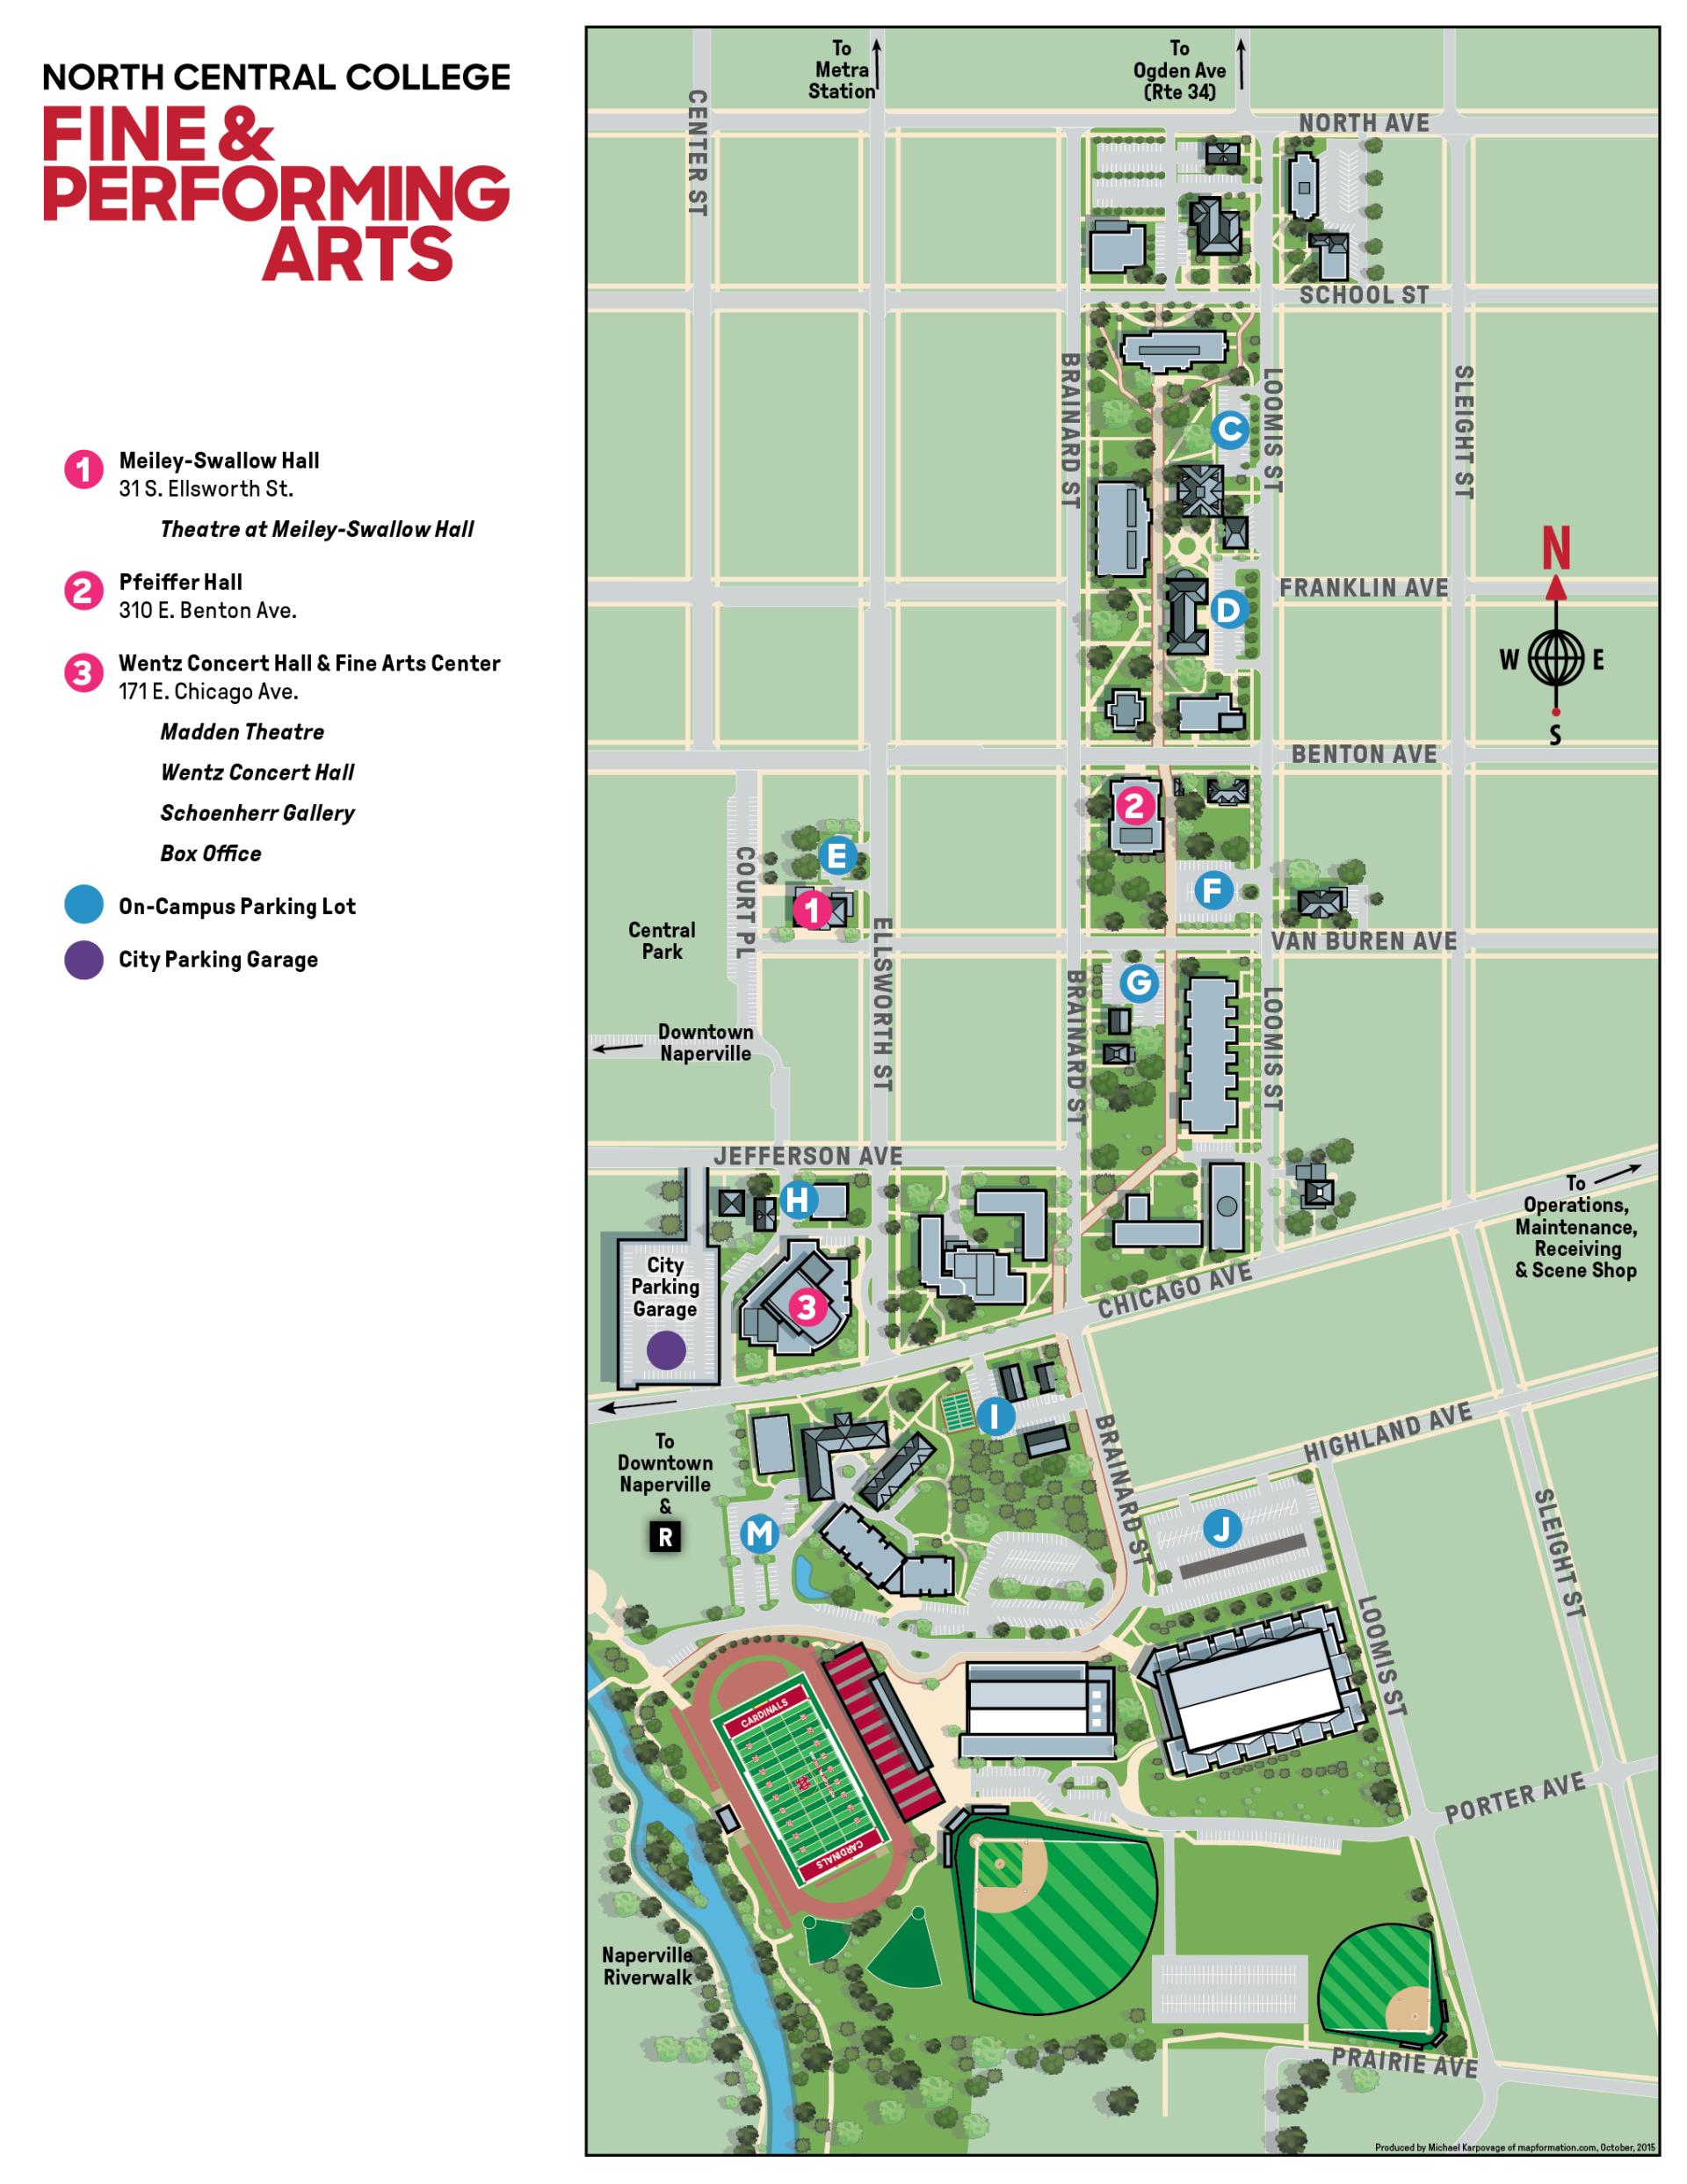 A map of parking lots at North Central College.